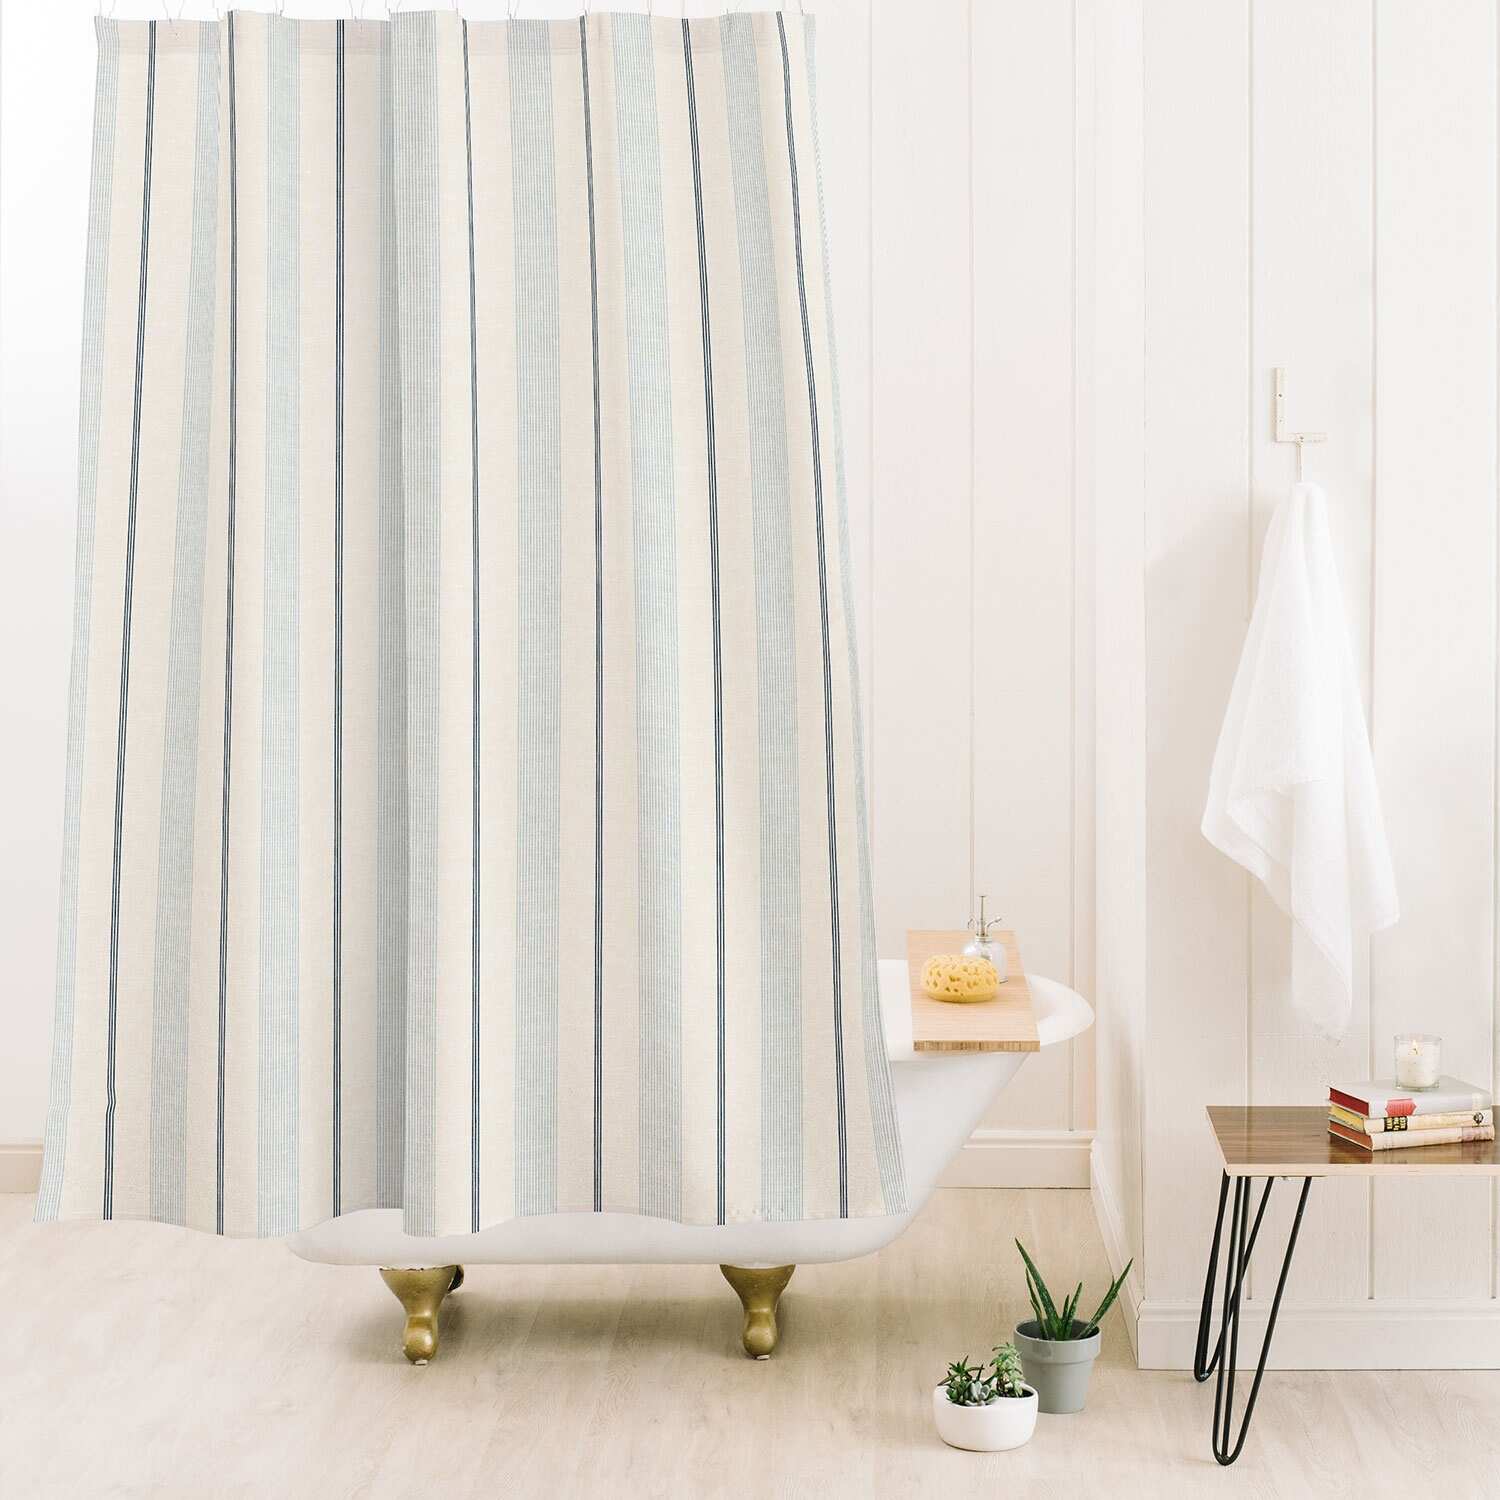 Little Arrow Design Co Ivy Stripes Cream Dusty Blue Made to Order Shower Curtain 71" x 74" with Liner - 71" x 74"